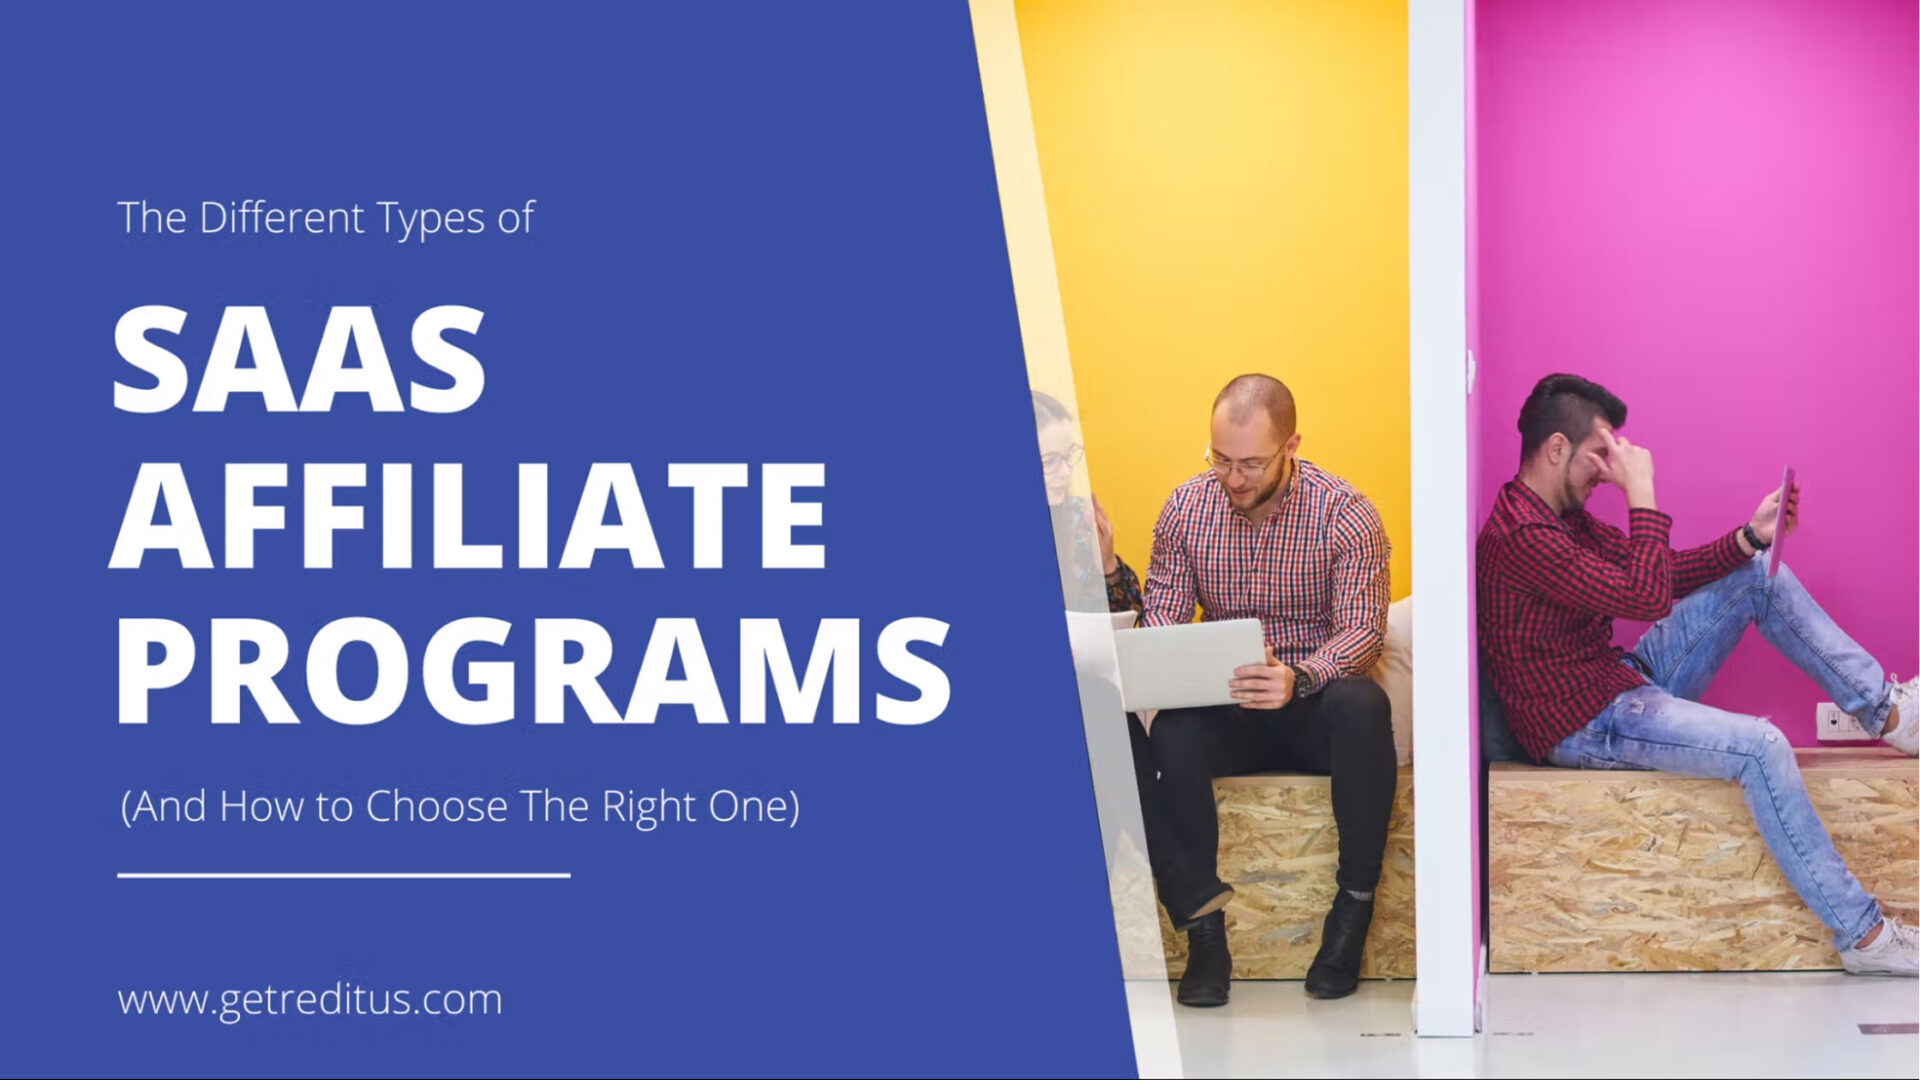 The Different Types of SaaS Affiliate Programs